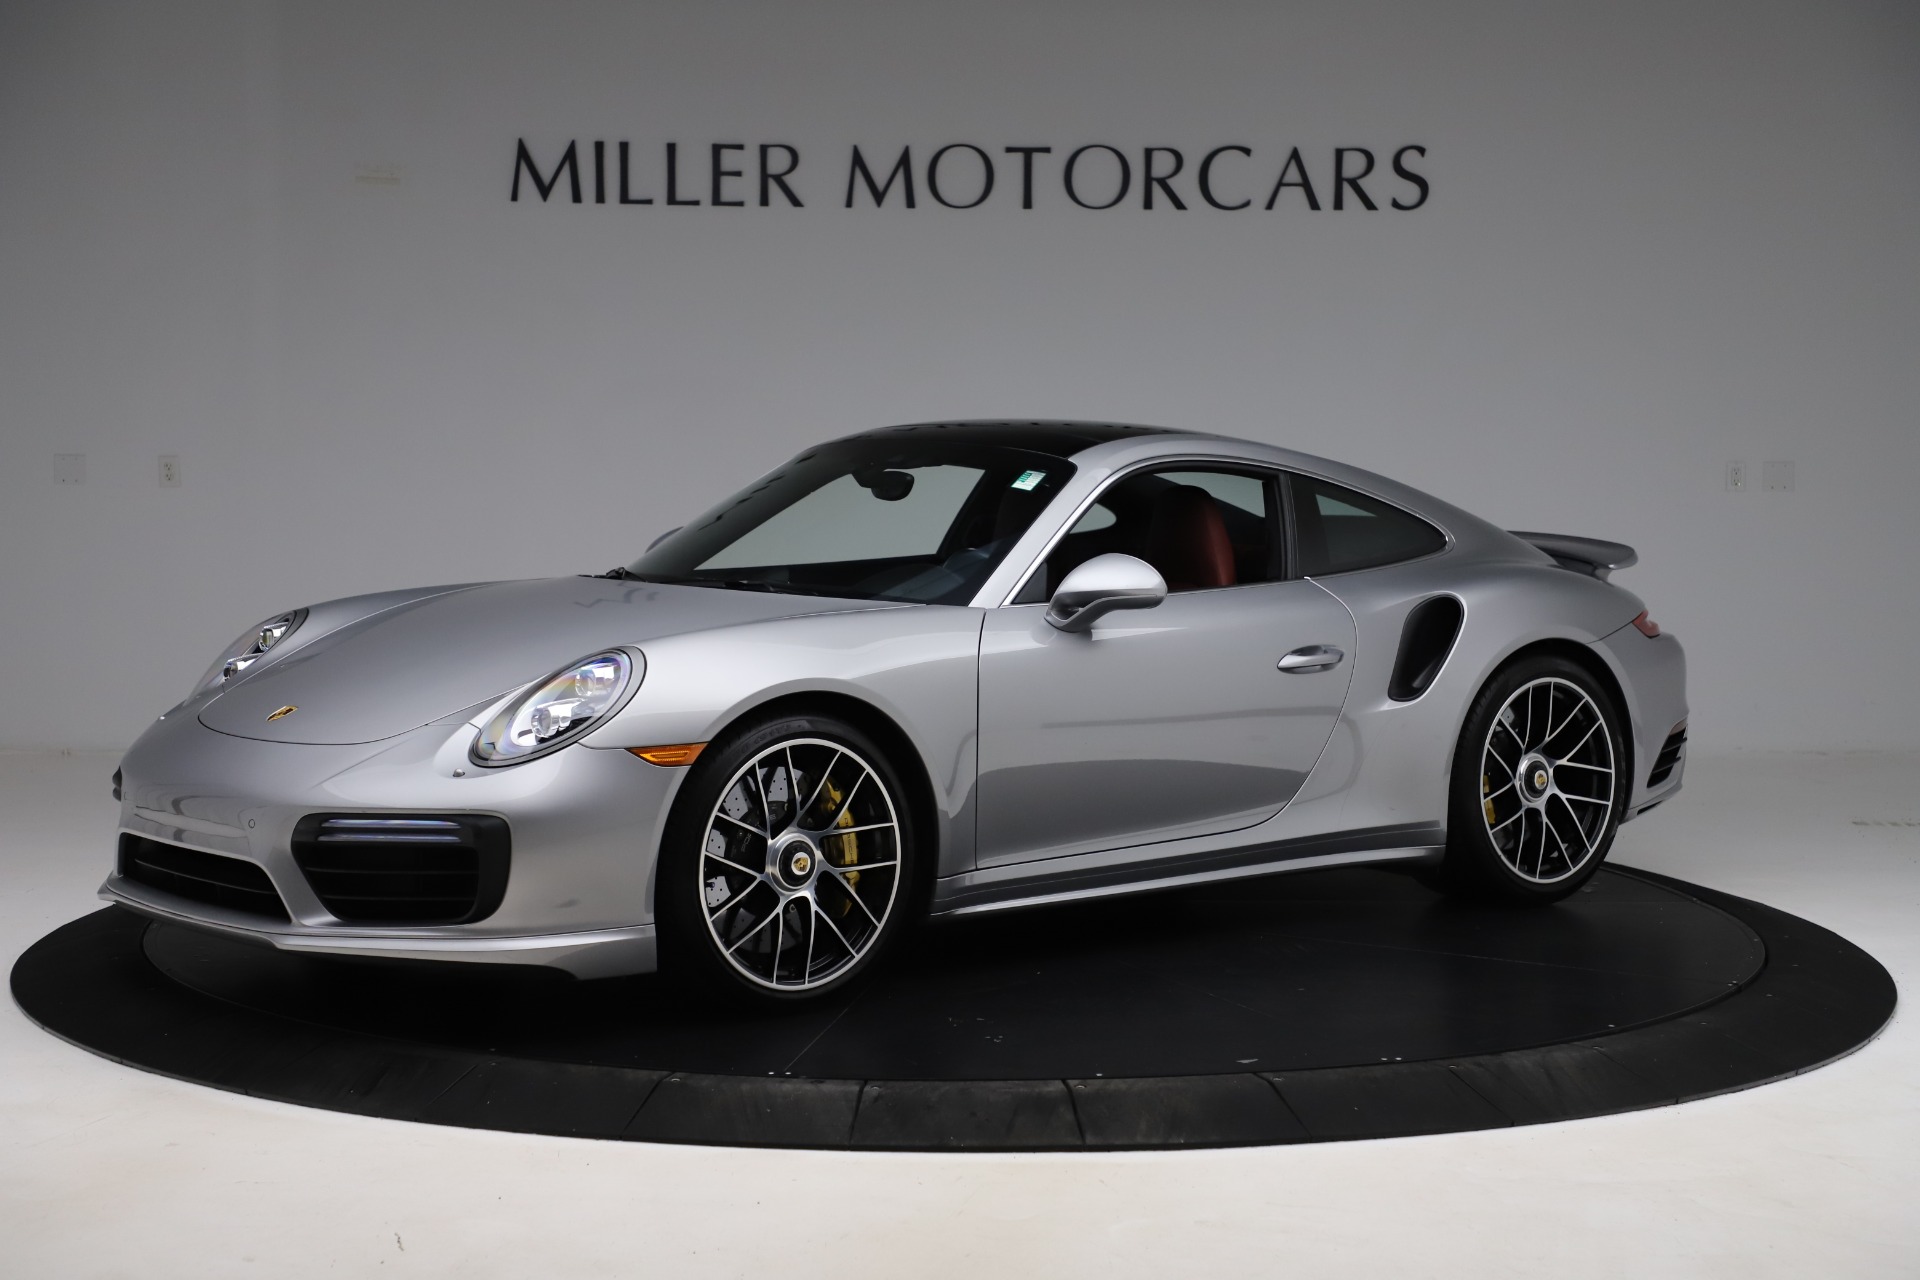 PreOwned 2017 Porsche 911 Turbo S For Sale () Miller